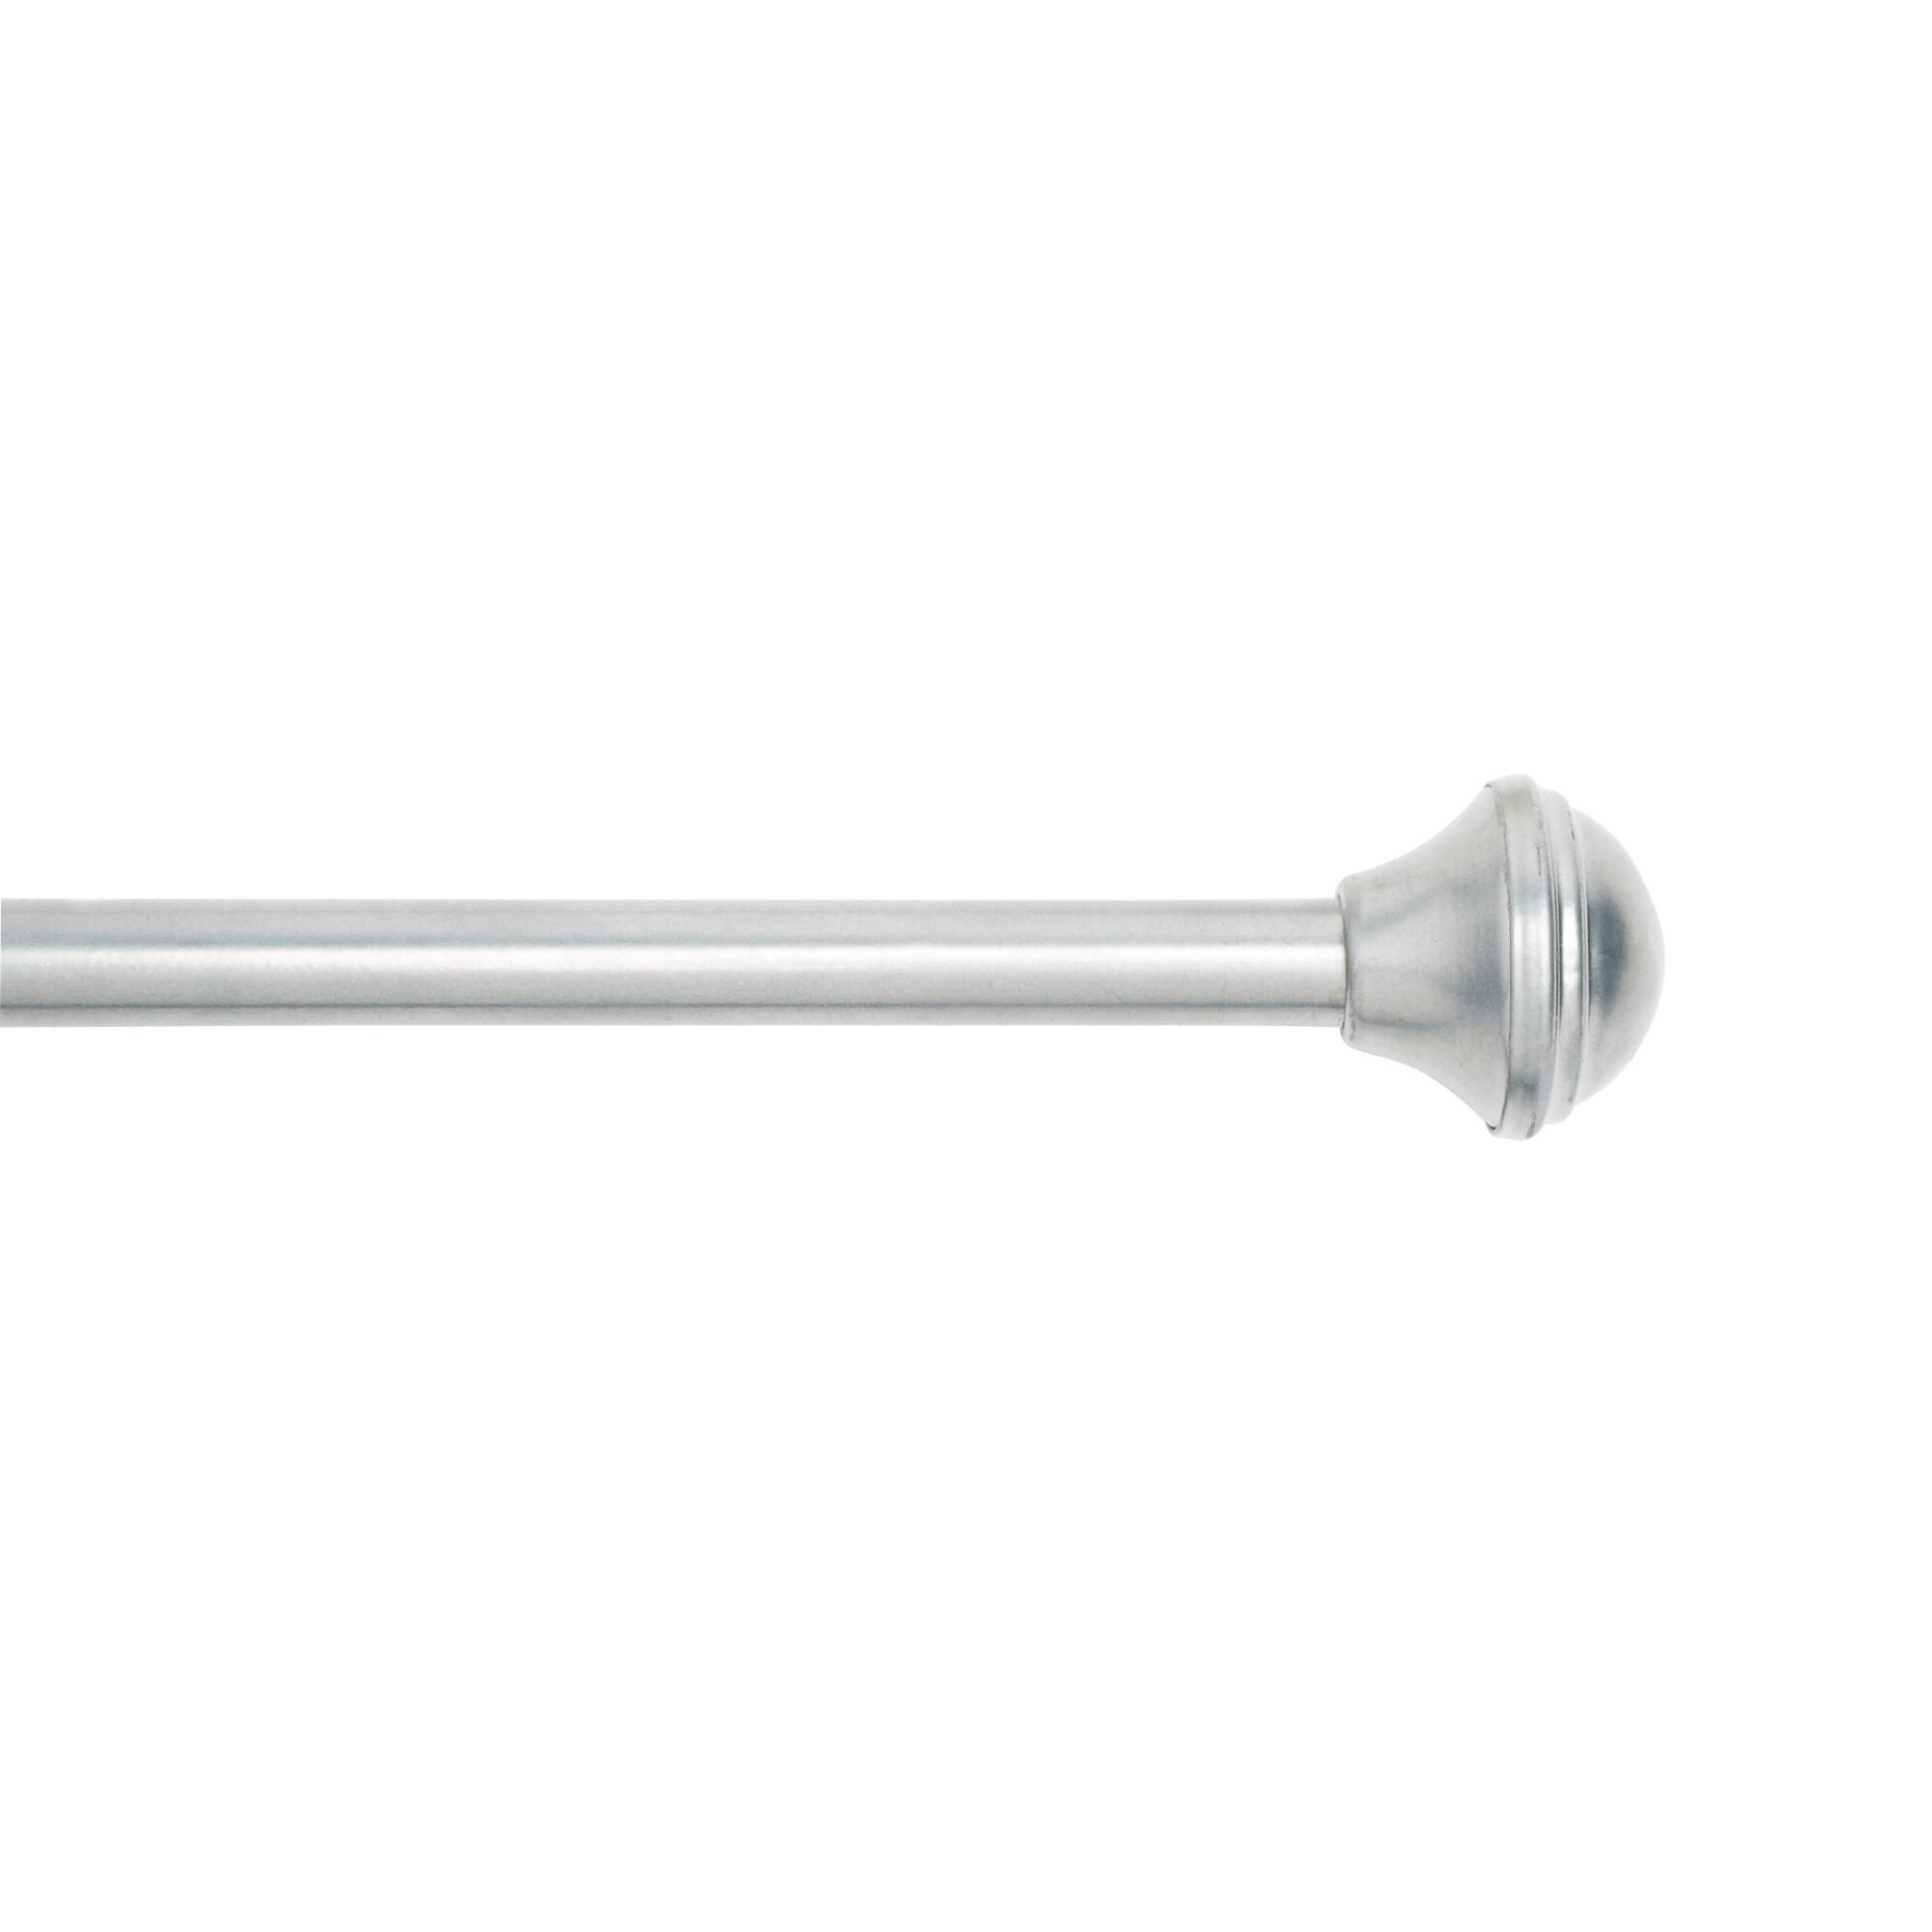 Chic Design Silver Curtain Rods Curtain Rod Finials For Metal With Throughout Metal Curtain Rod Finials (View 18 of 25)